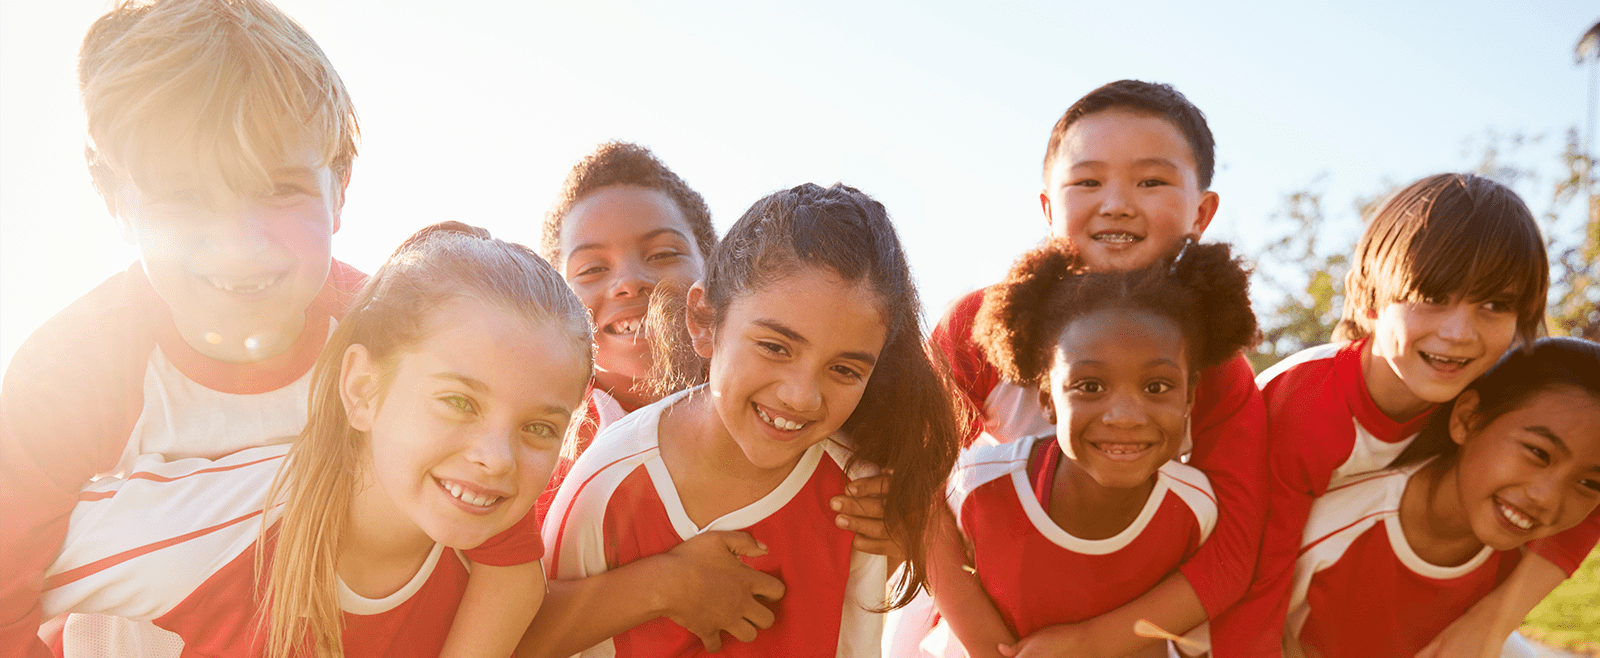 Kids avoiding sports injuries by staying safe in outdoors elementary school sports